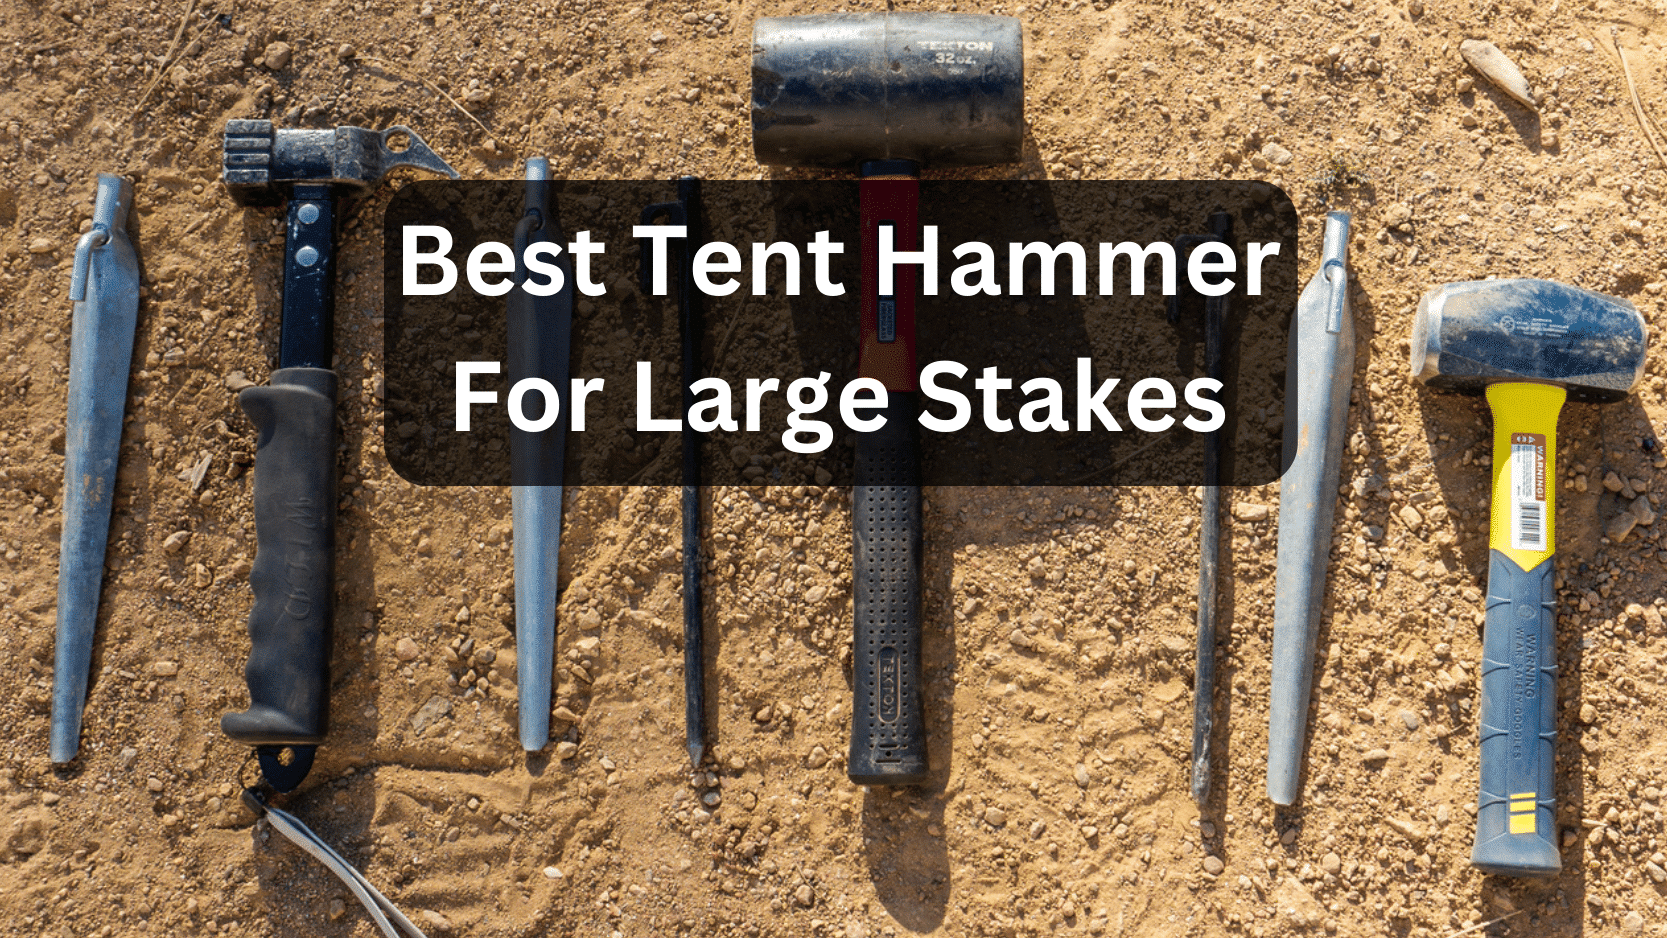 The Best Tent Hammer for Large, Heavy-Duty Tent Stakes